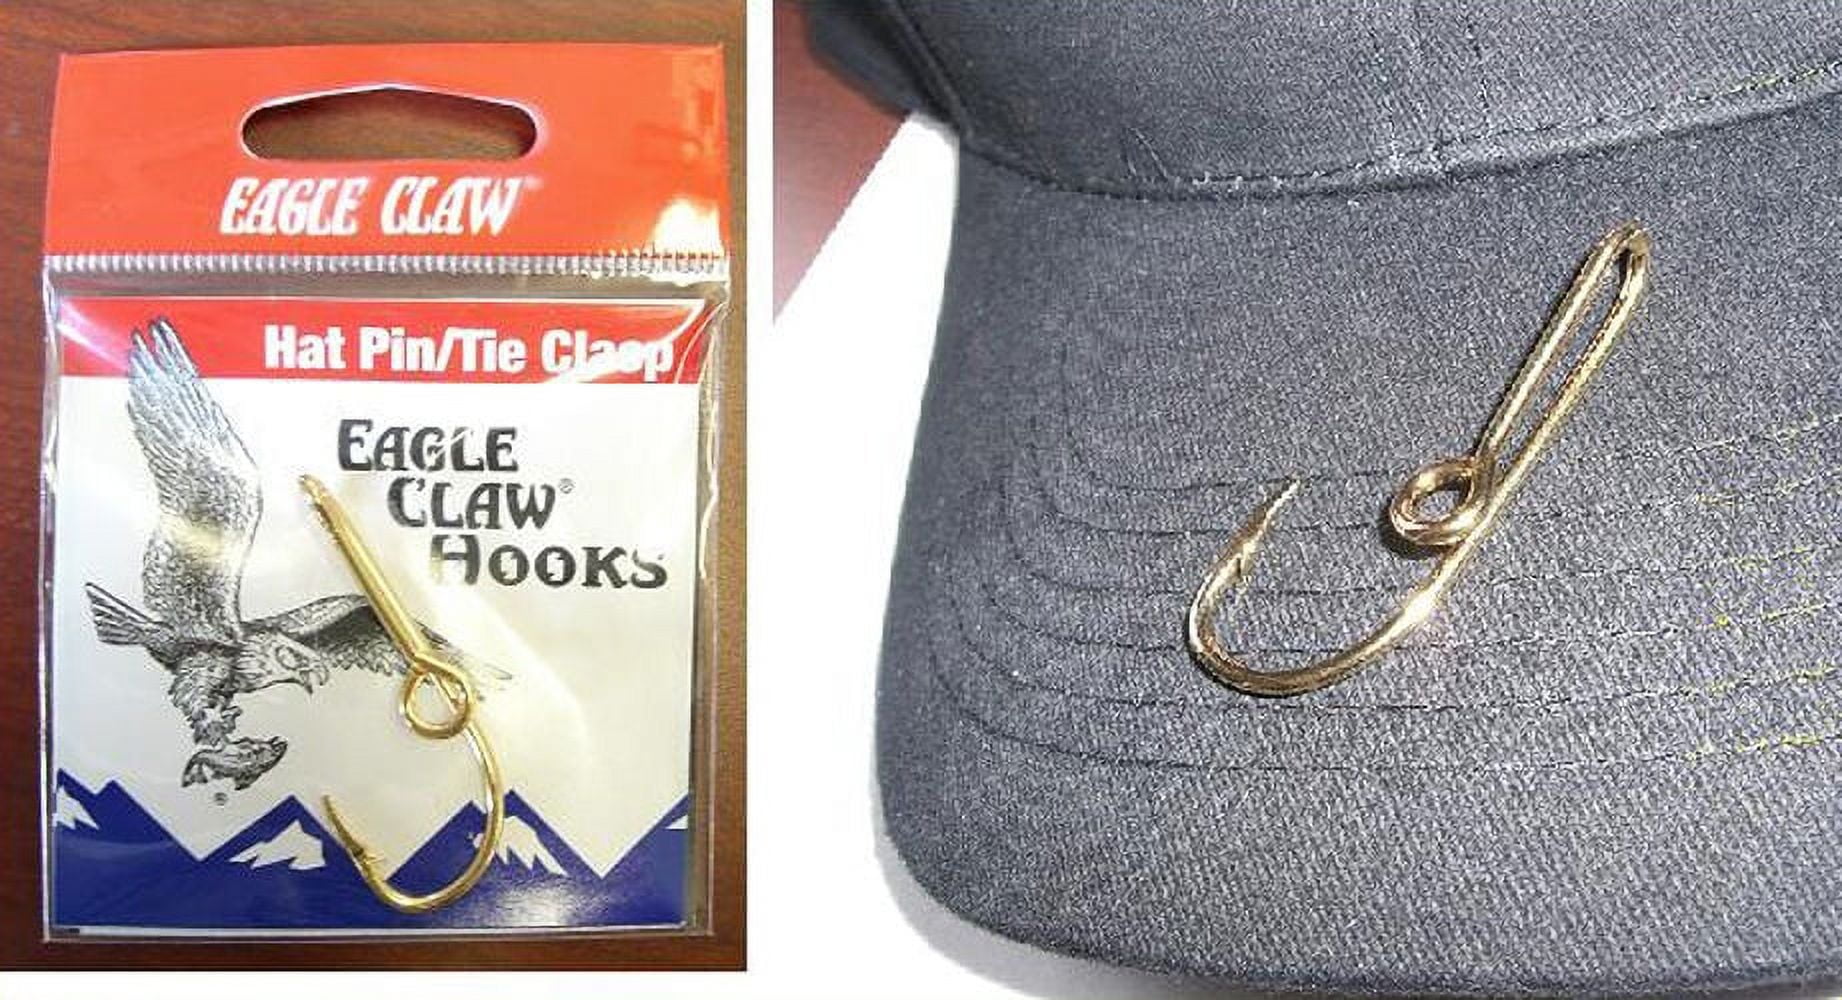 EAGLE CLAW HAT HOOK NEW! Hat Pin/Tie Clasp GOLD PLATED FISH HOOK HAT PIN  #155AH 